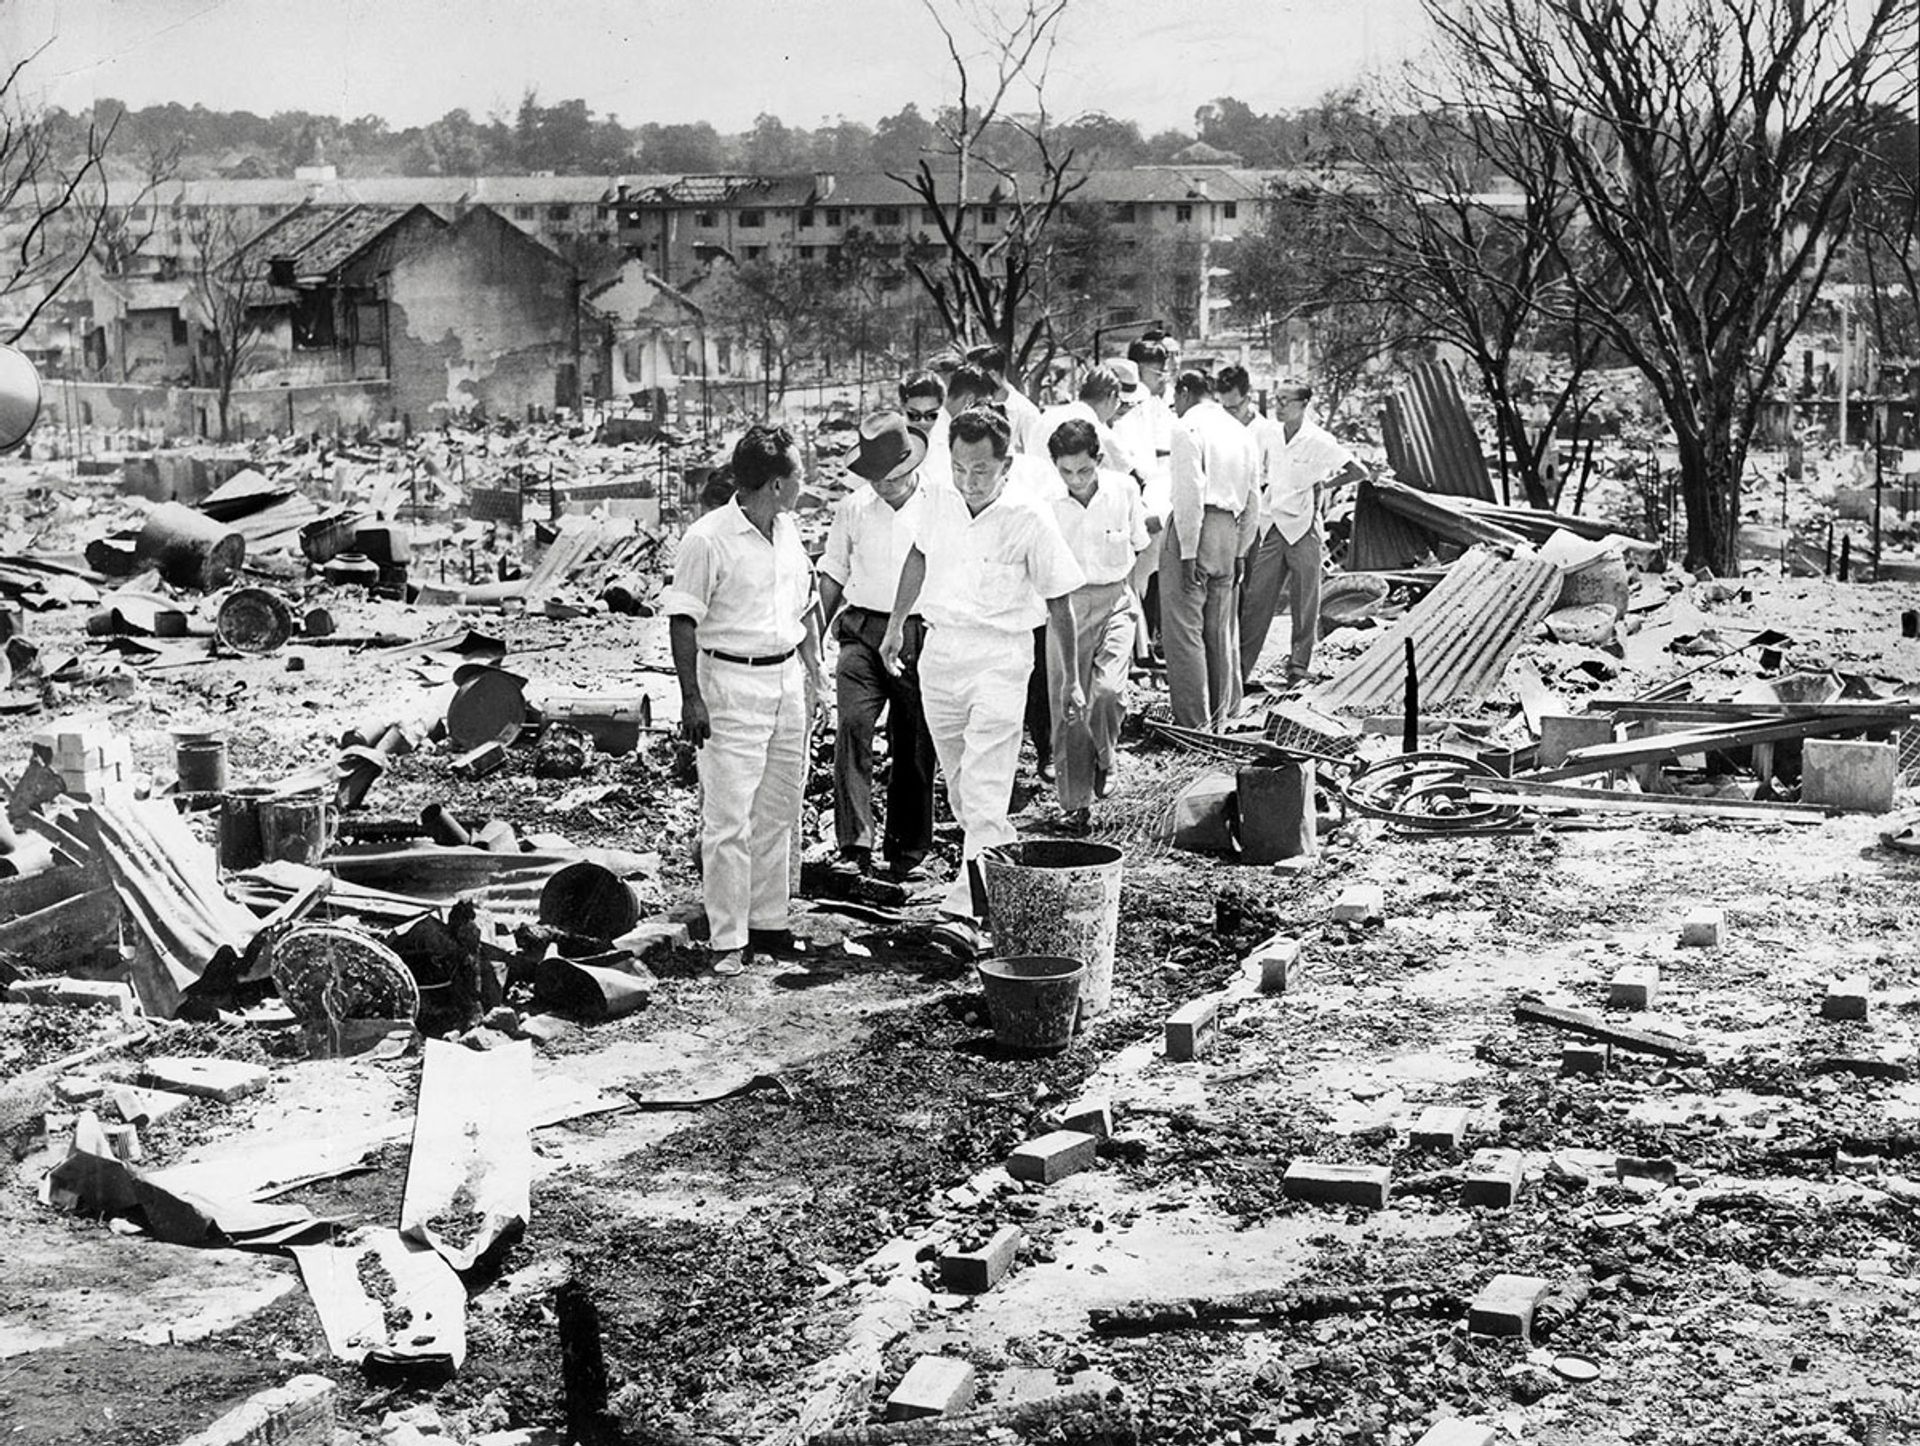 The Bukit Ho Swee fire on May 25, 1961, razed the entire area to the ground, killing four, injuring 85 others and rendering 16,000 homeless. Mr Lee (third from left), with National Development Minister Tan Kia Gan (left), visited the site after the fire was put out. The Government moved quickly to provide housing for the victims. In February the following year, HDB completed new flats in the area to provide shelter for 1,900 families affected by the fire. Source: The Straits Times